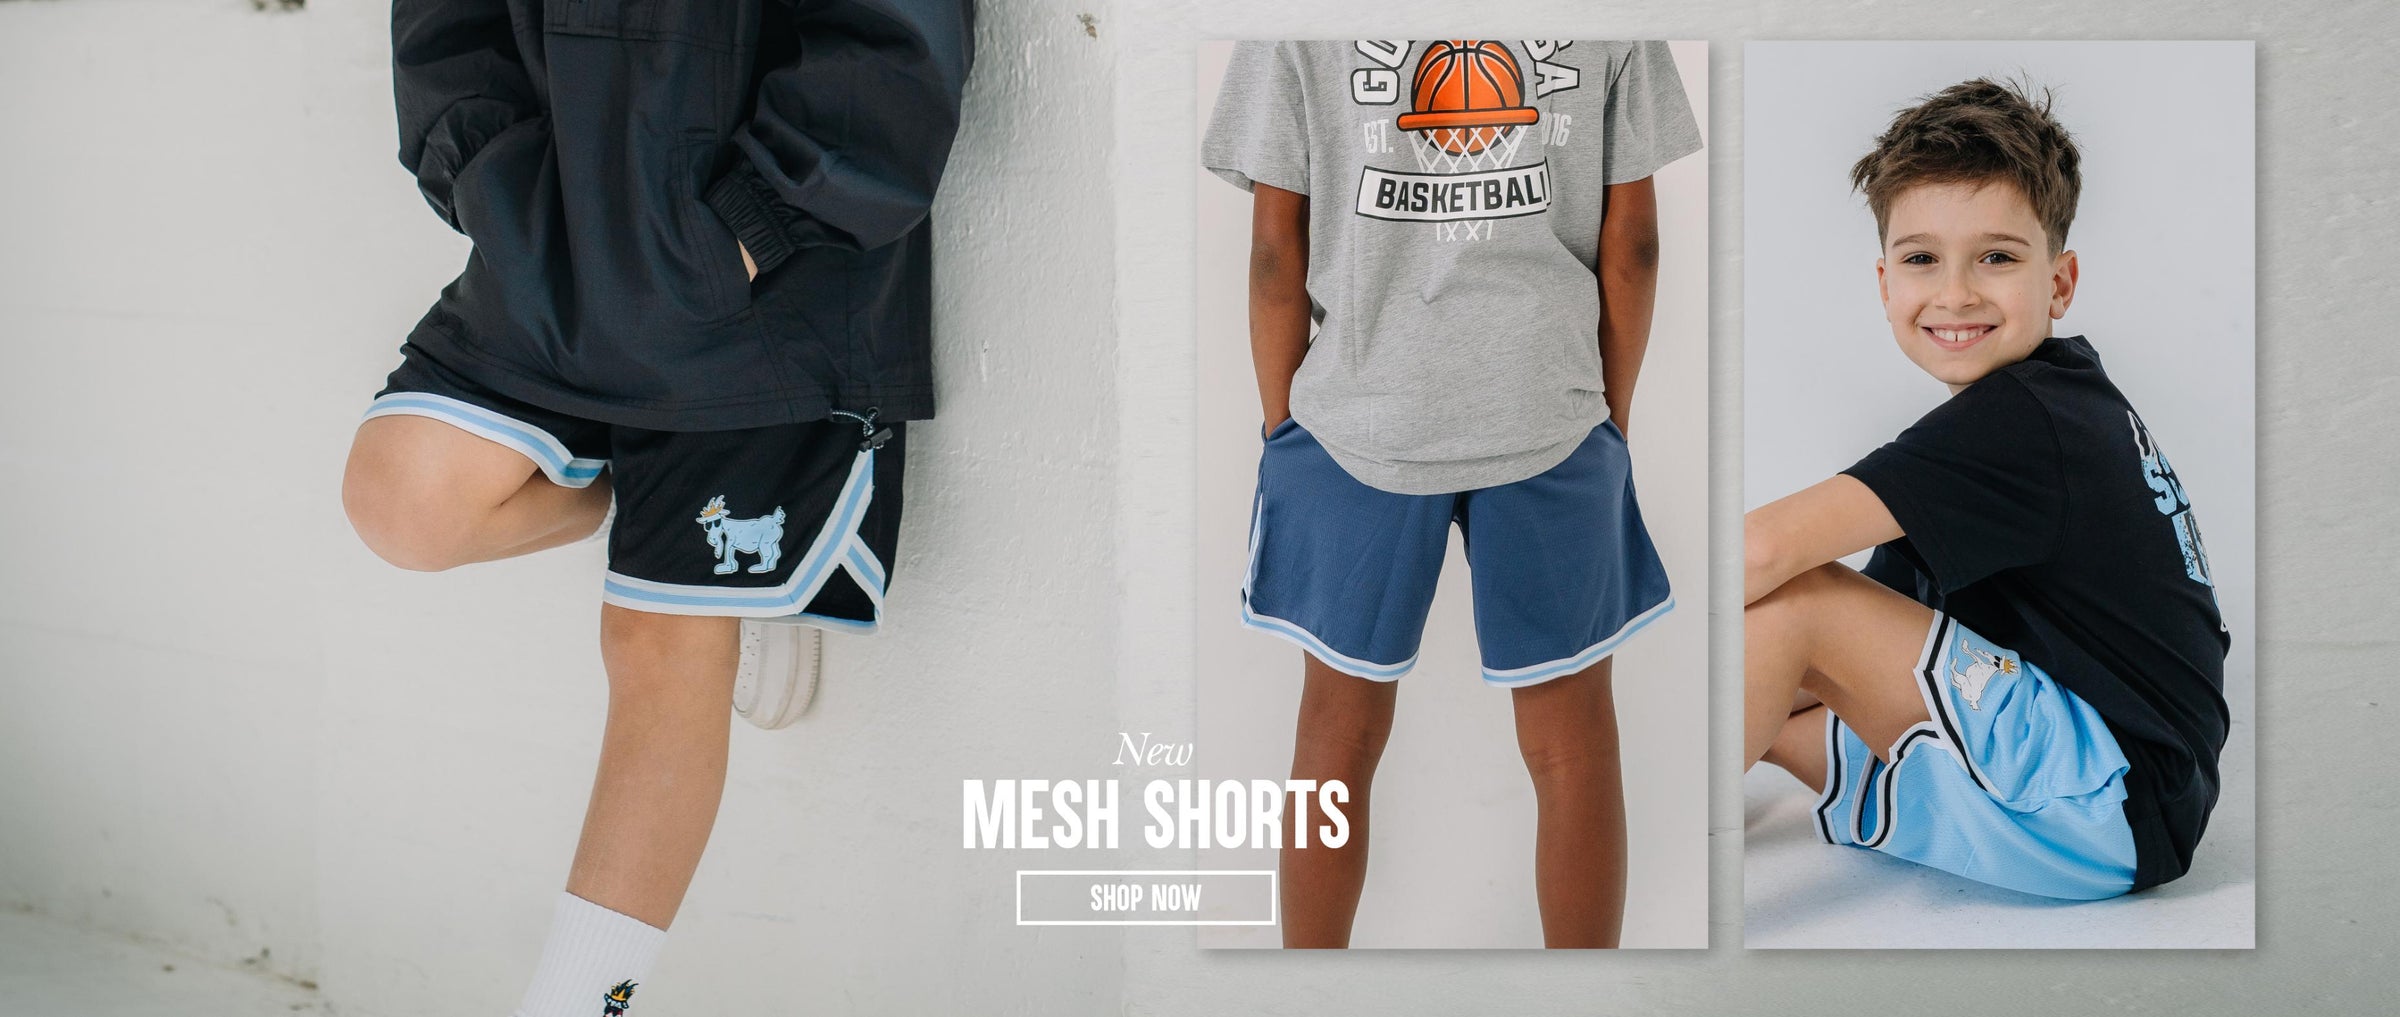 Various images of boys in shorts with text that reads "New Mesh Shorts Shop Now"